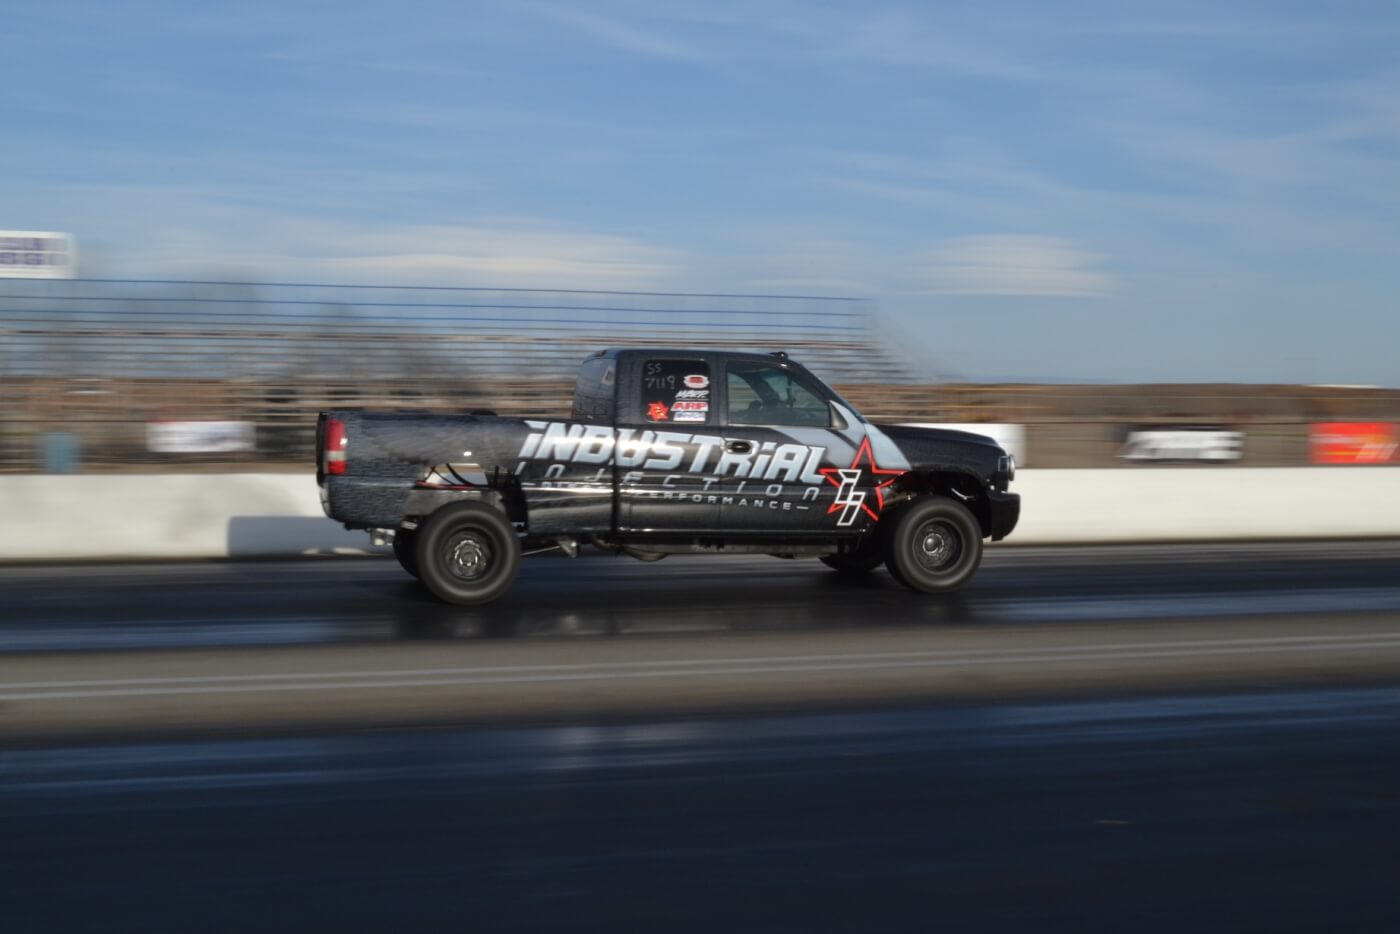 Brett Williams from Industrial Injection in his 2001 Chevy Duramax. 